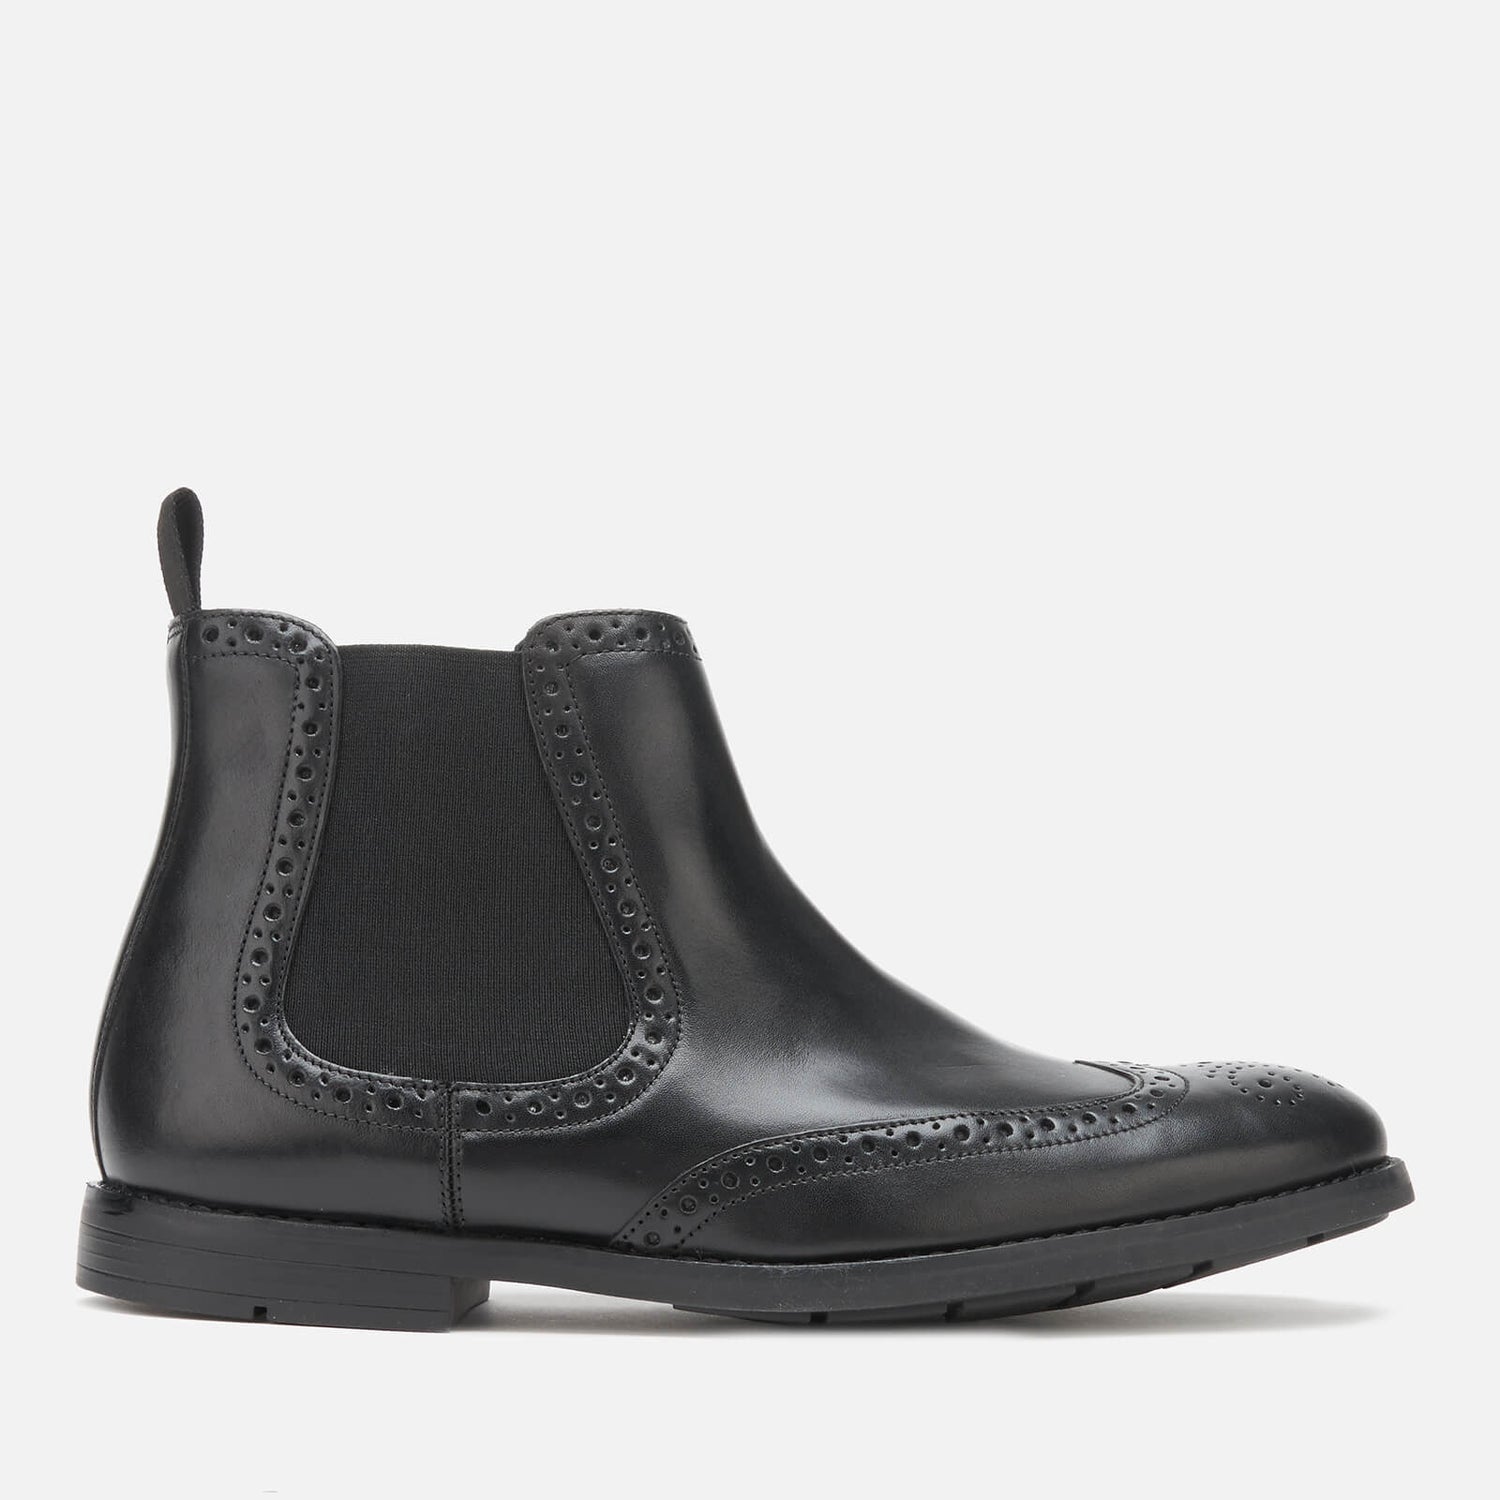 Clarks Men's Ronnie Top Leather Chelsea Boots - Black | FREE UK ...